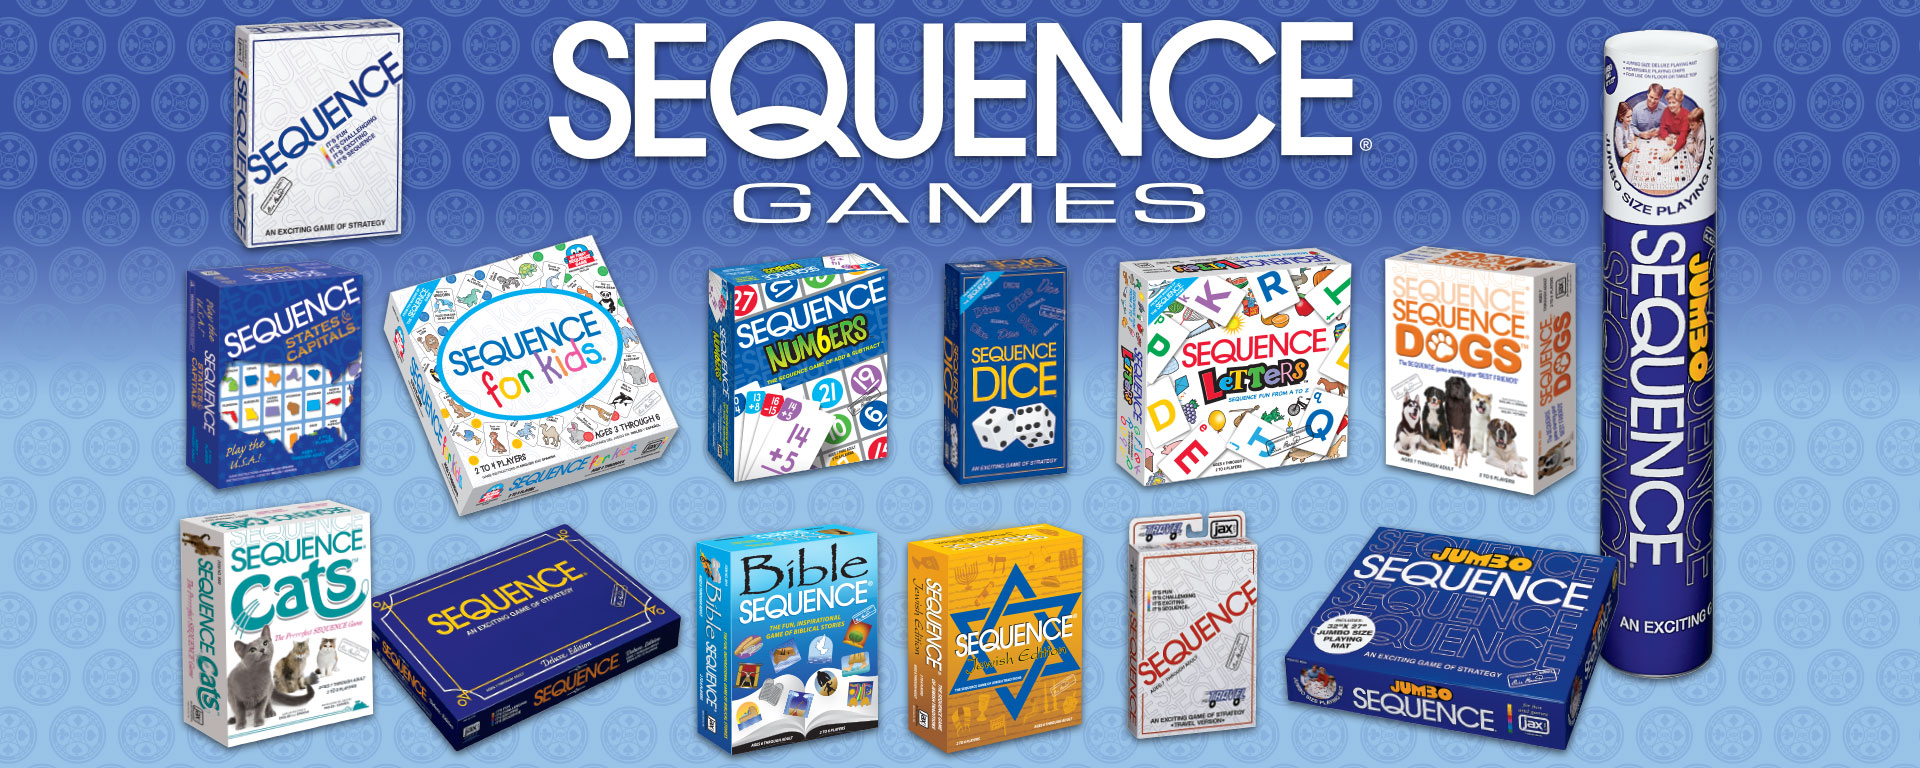 Sequence Games